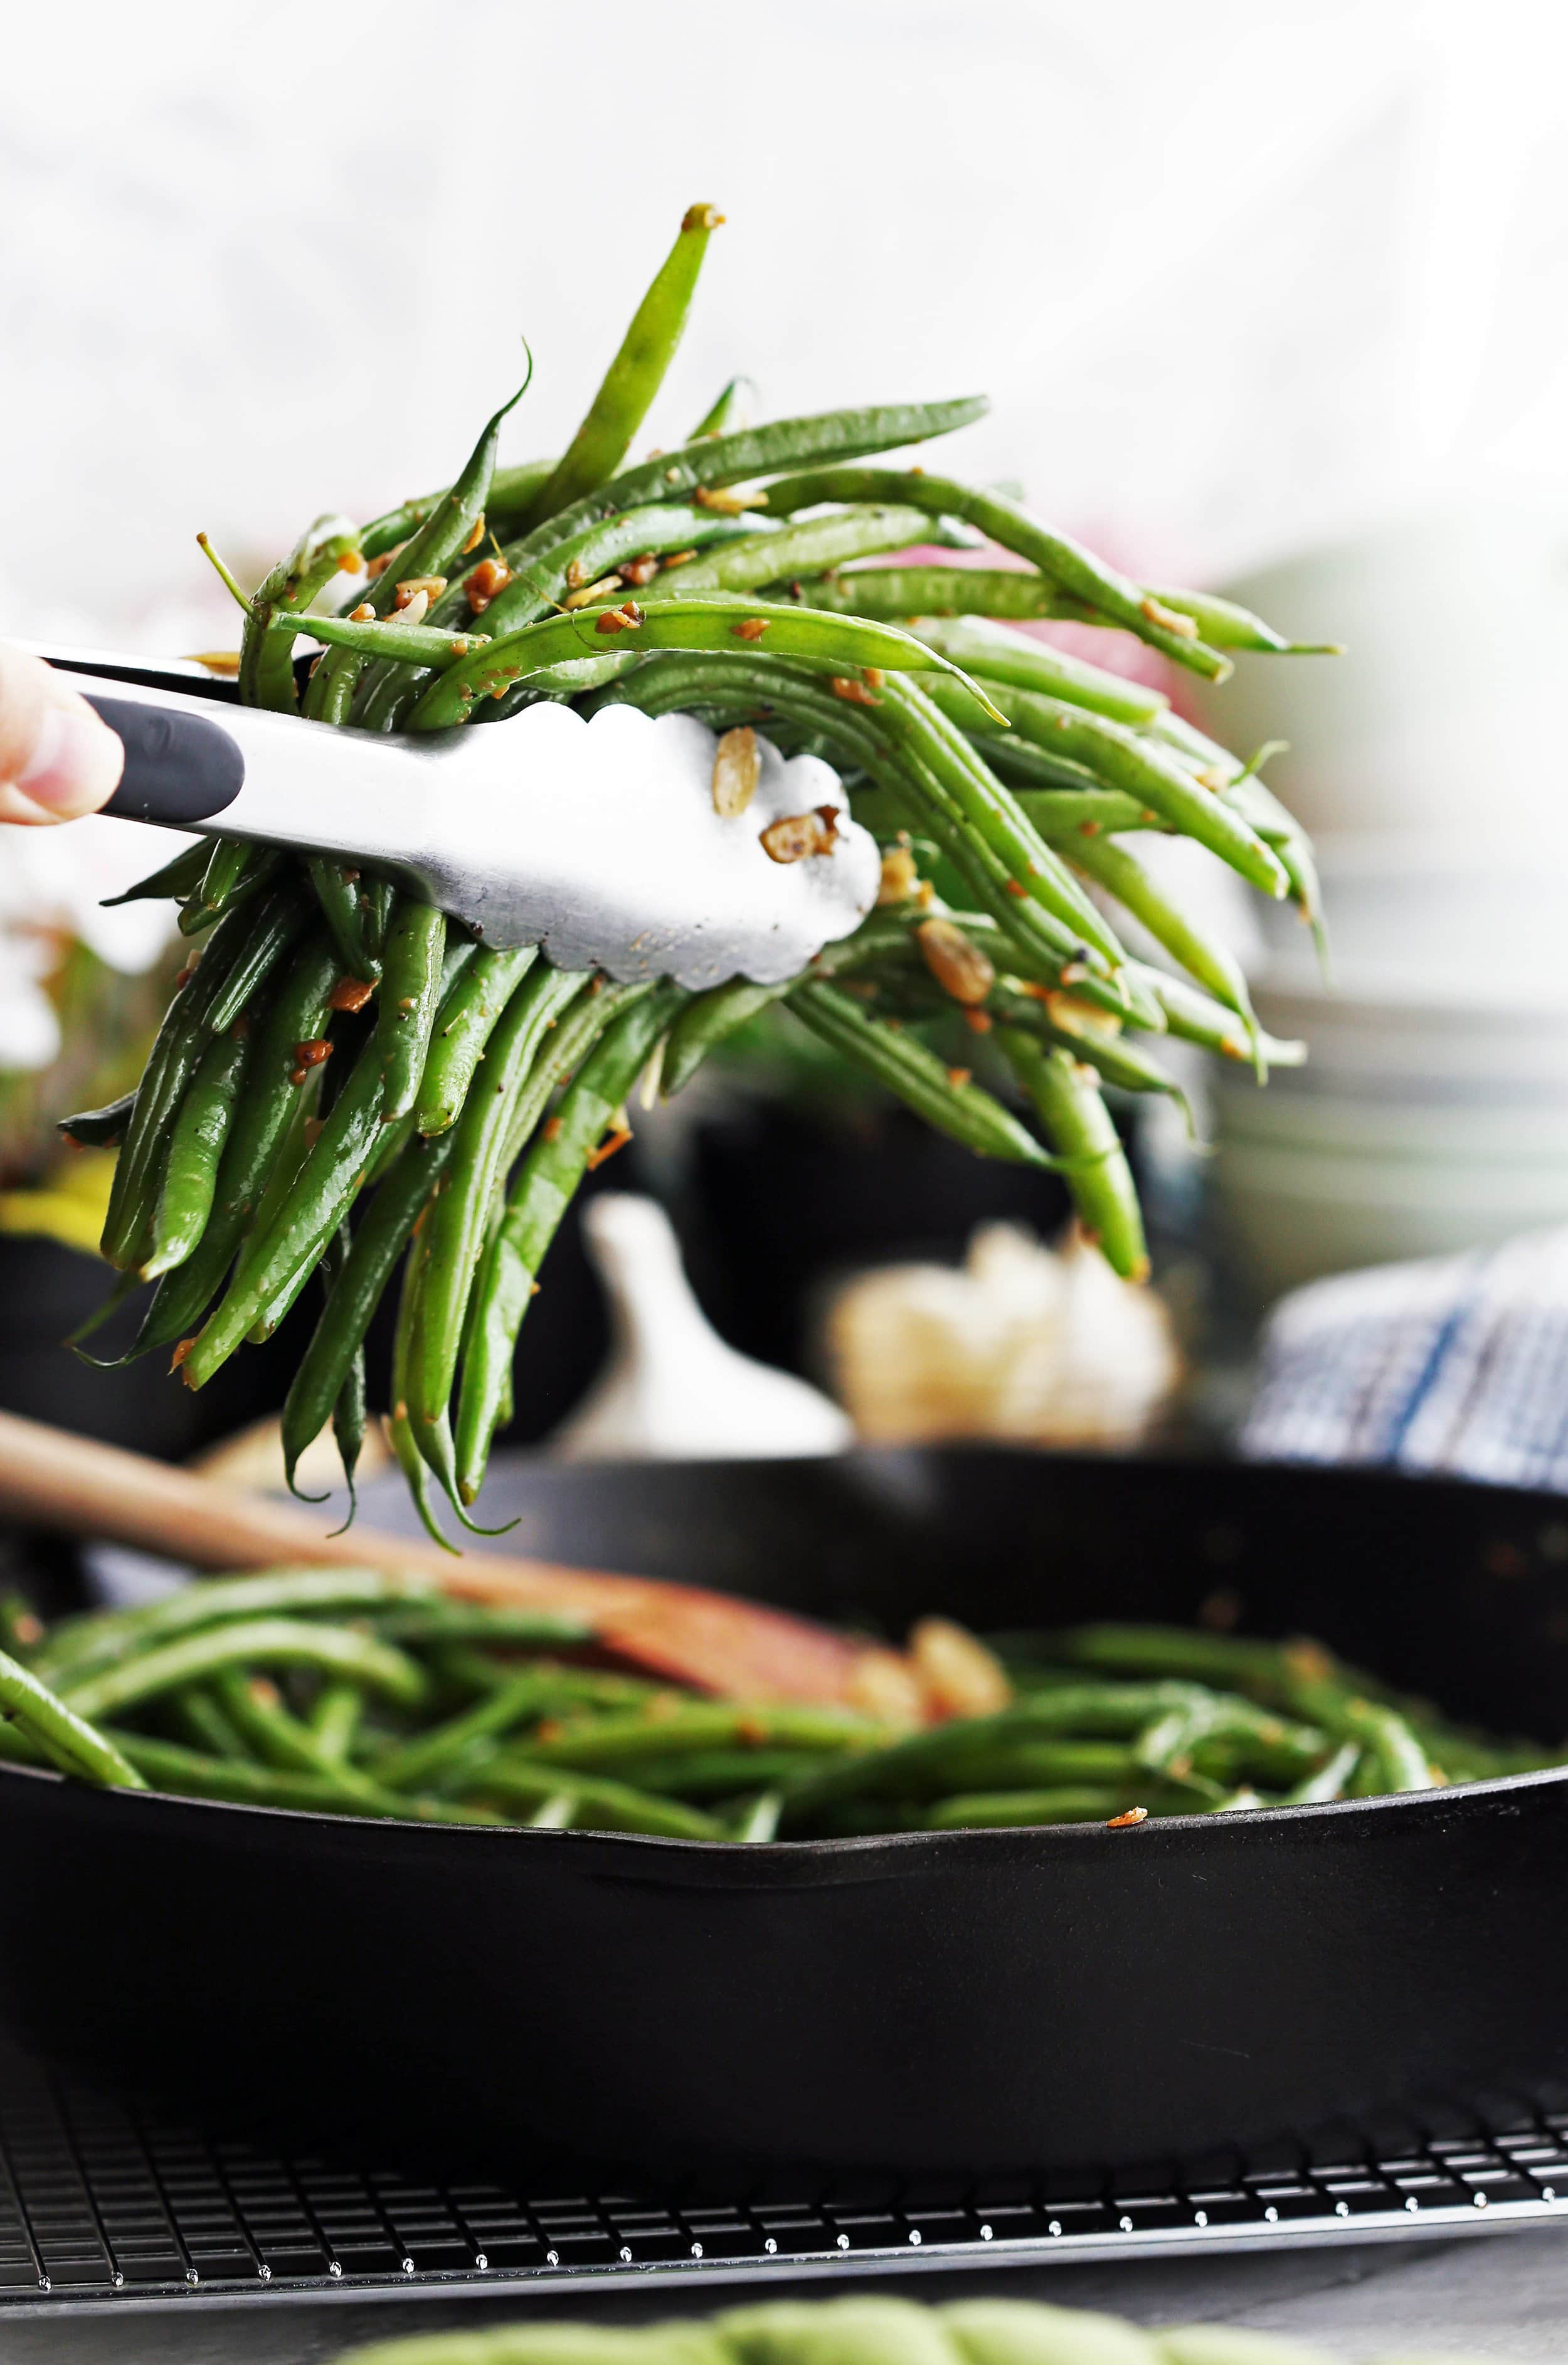 Metal tongs holding garlic ginger green beans with more green beans in a cast iron skillet below.